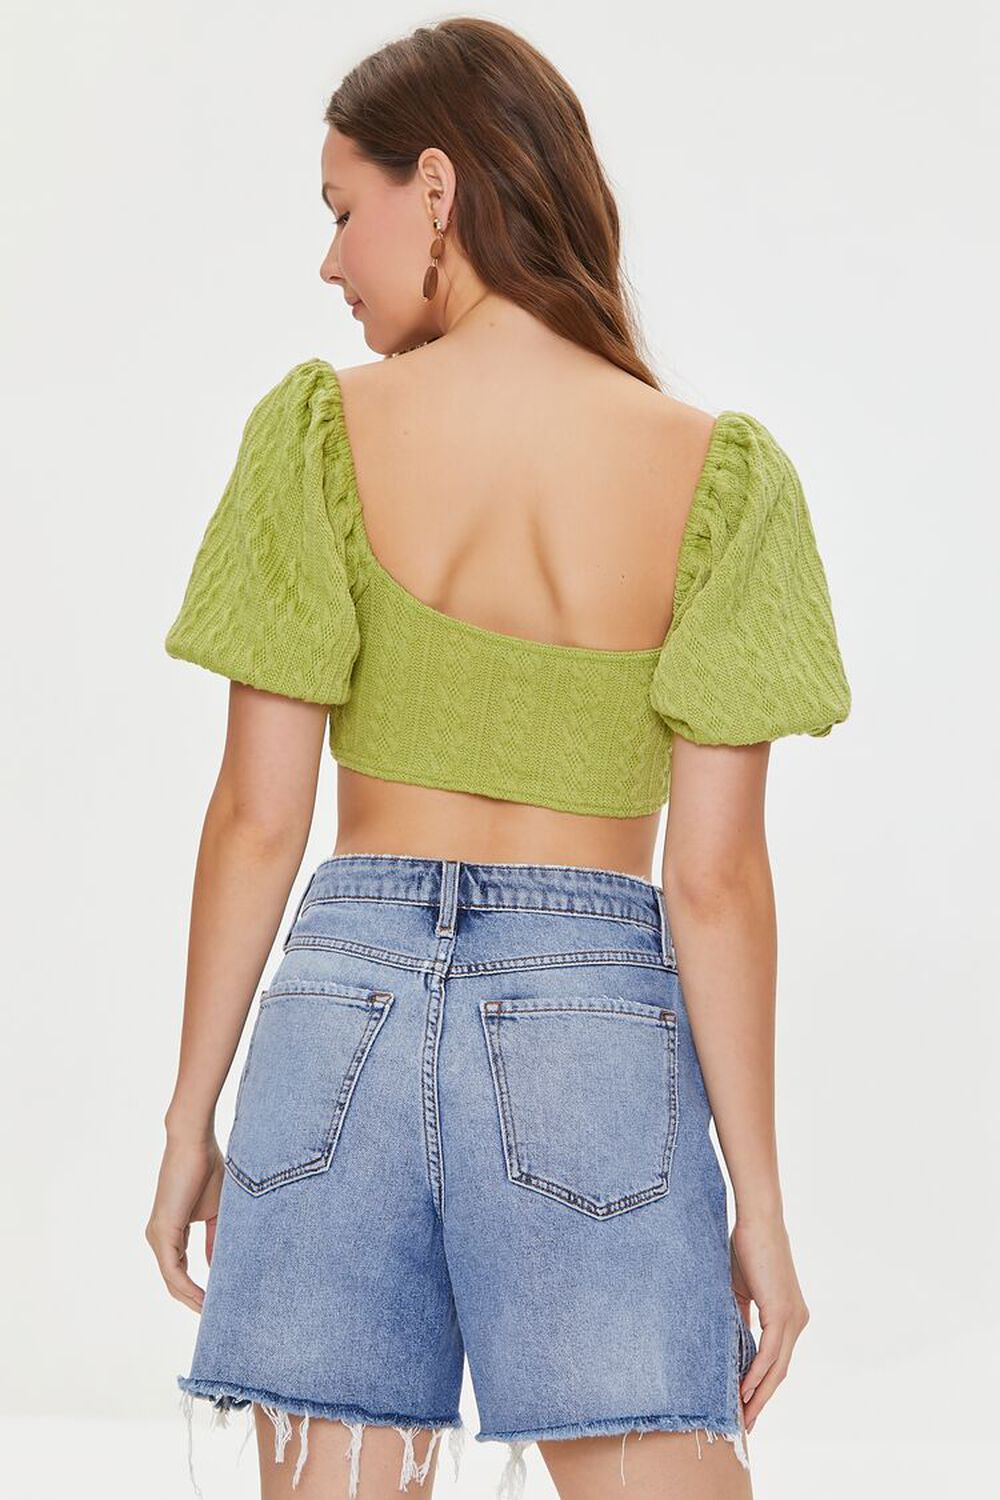 GREEN Cable Knit Twist-Front Crop Top, image 3